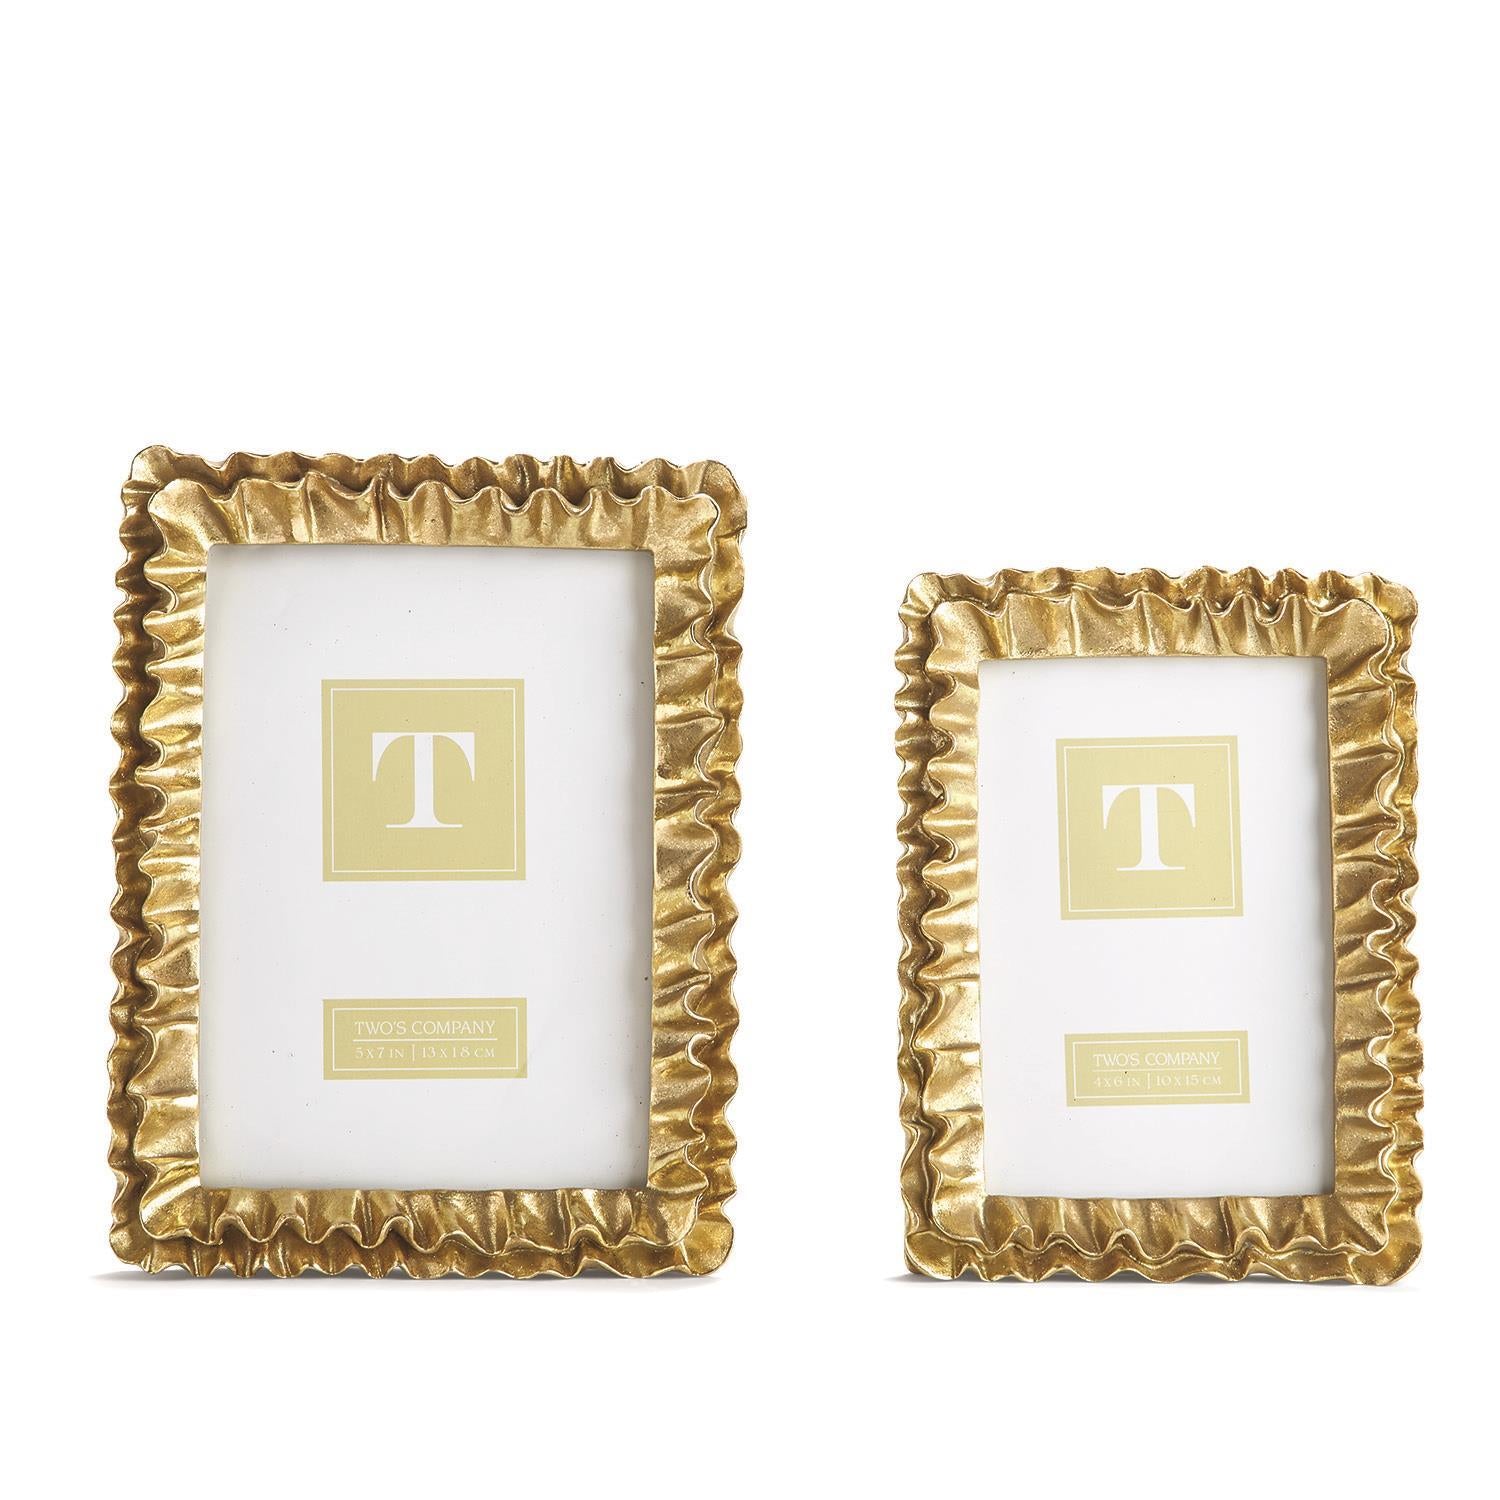 Two's Company S/2 Gold Ruffles Photo Frames Incl 2 Sizes